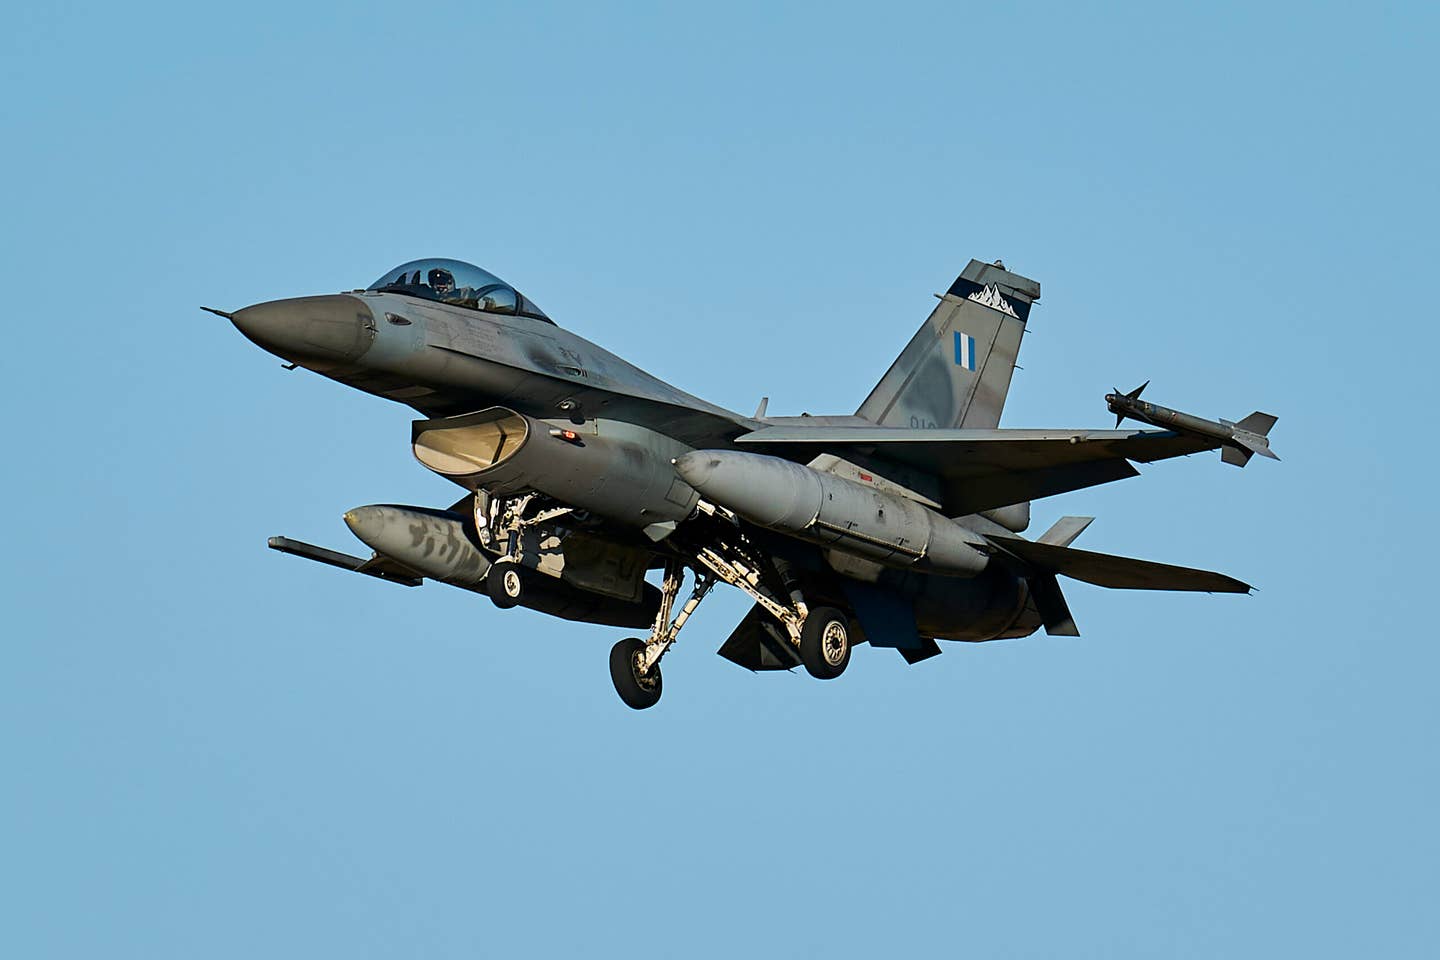 A Hellenic Air Force F-16 during one of the NATO Tactical Leadership Program (TLP) courses in Spain. <em>Photo By A. Perez Meca/Europa Press via Getty Images</em>